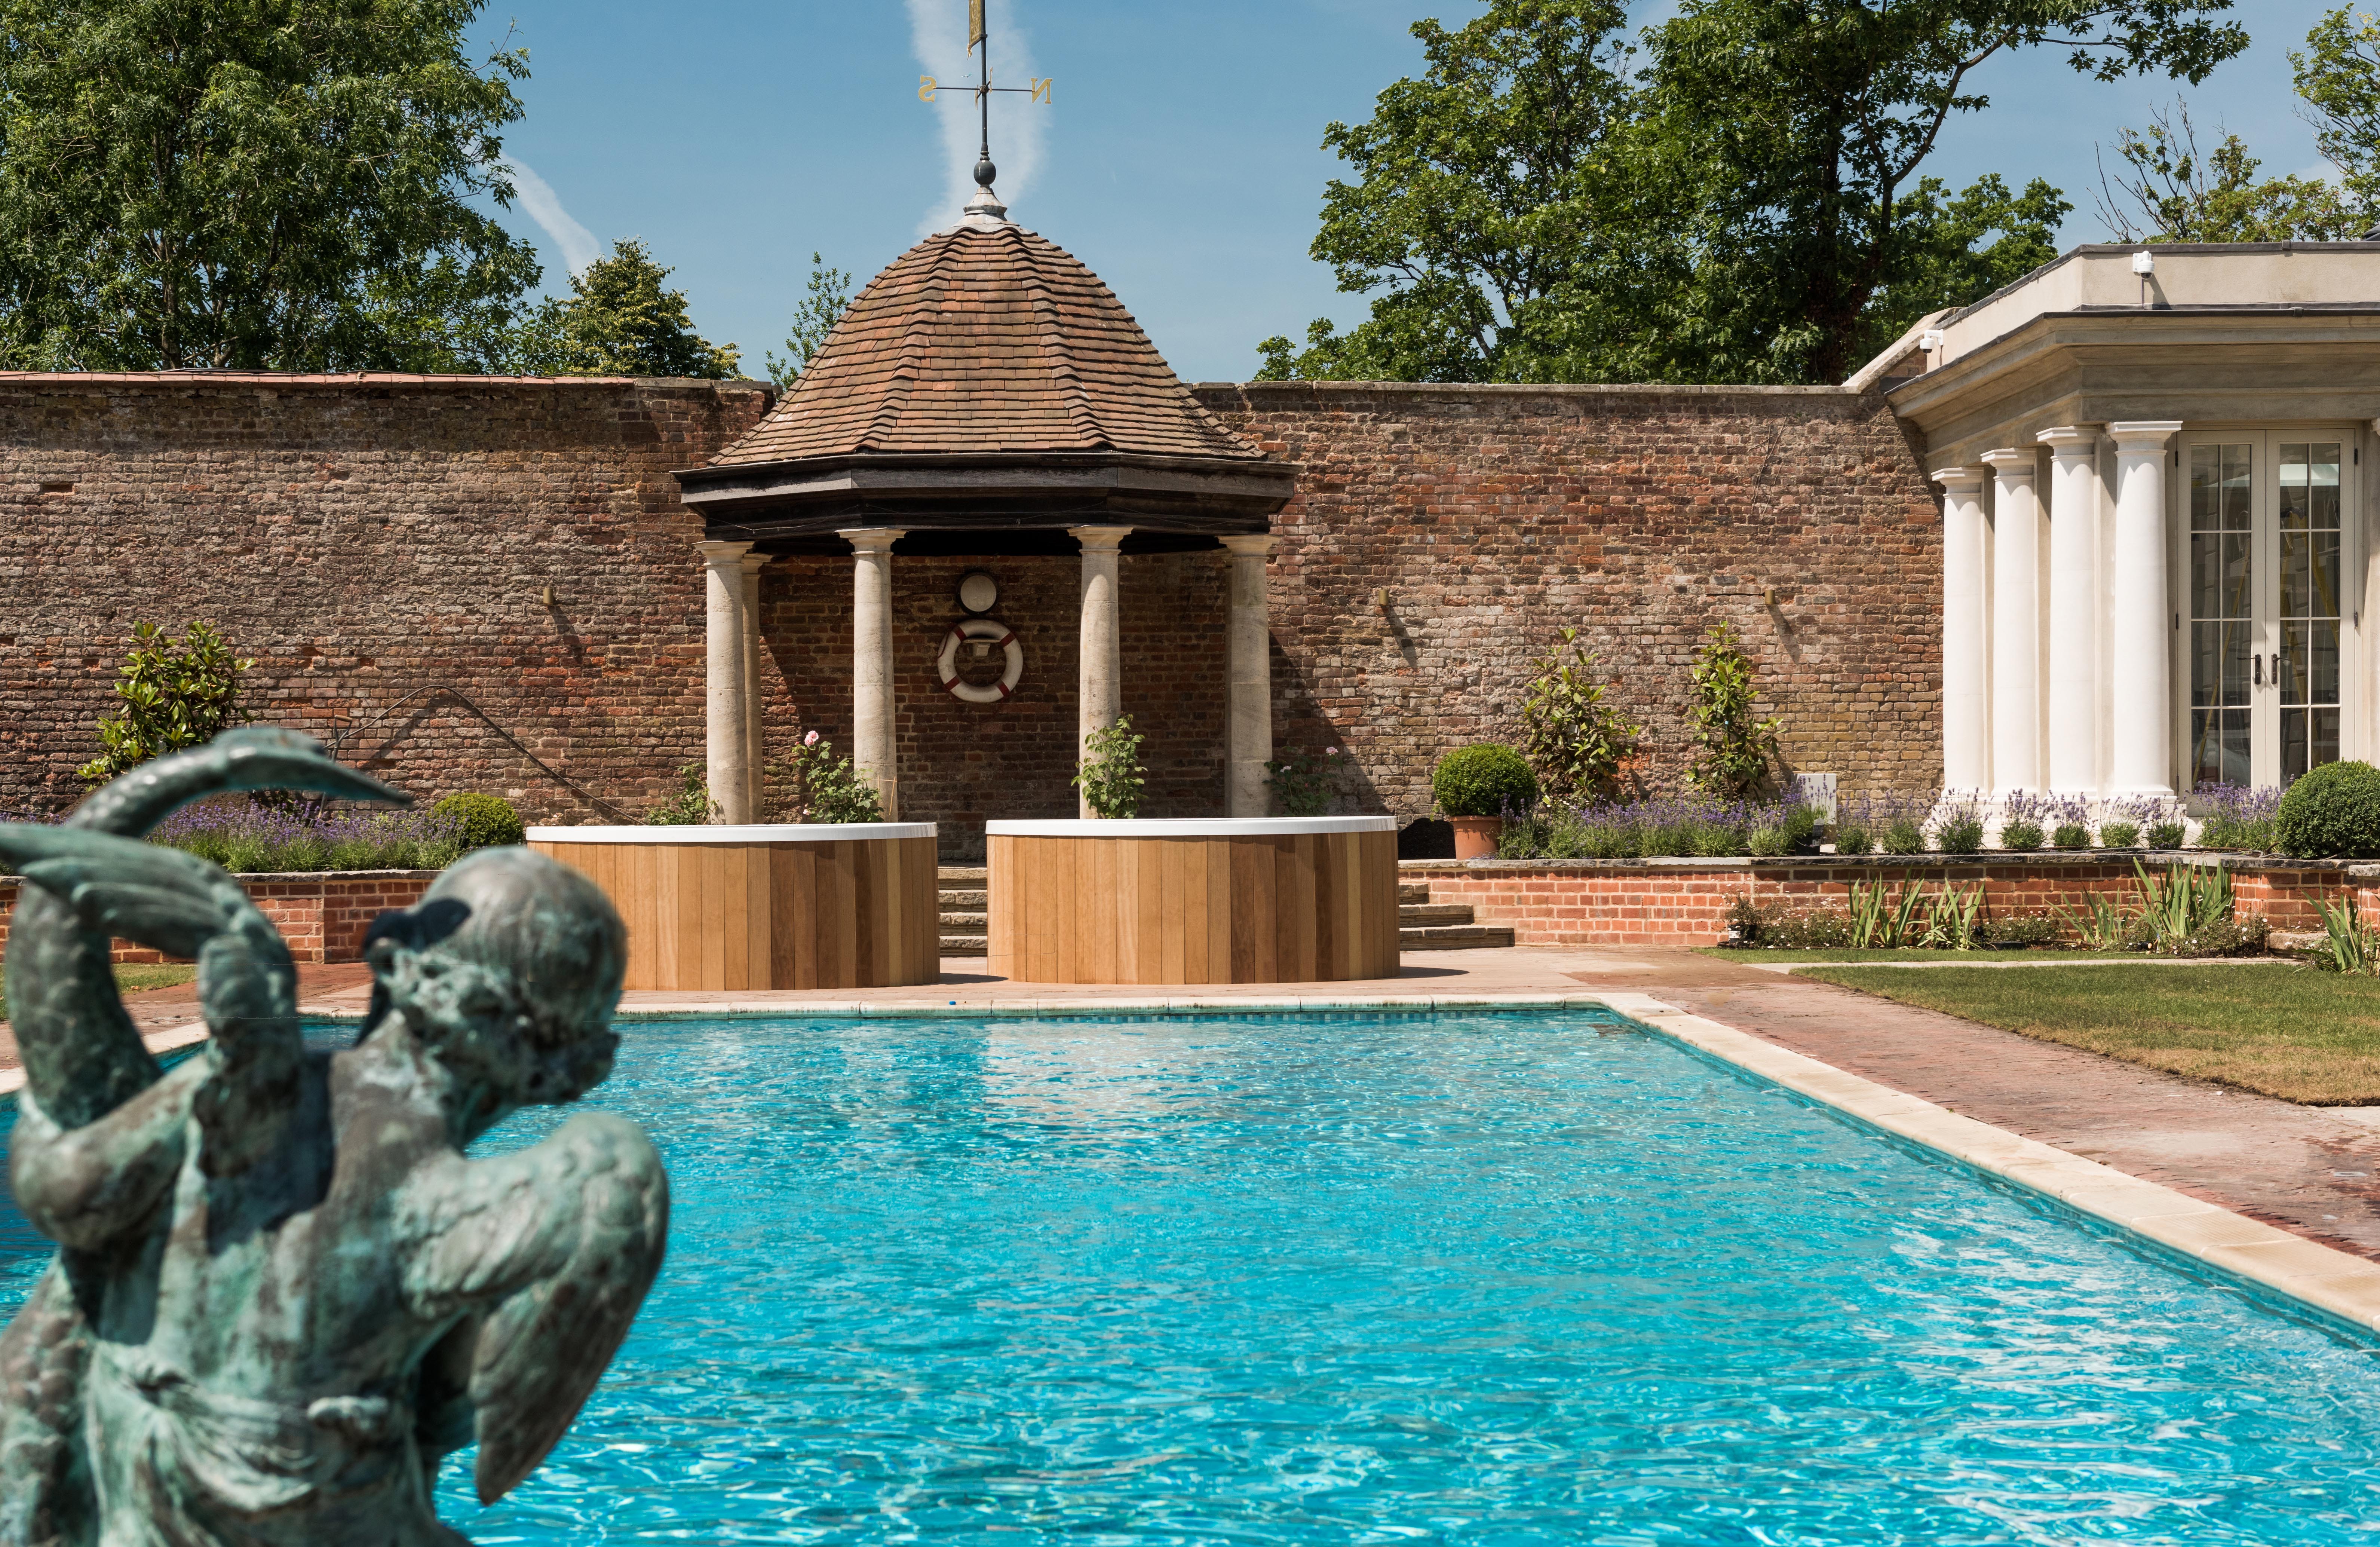 Take in the historic surroundings at Cliveden House as you take a dip